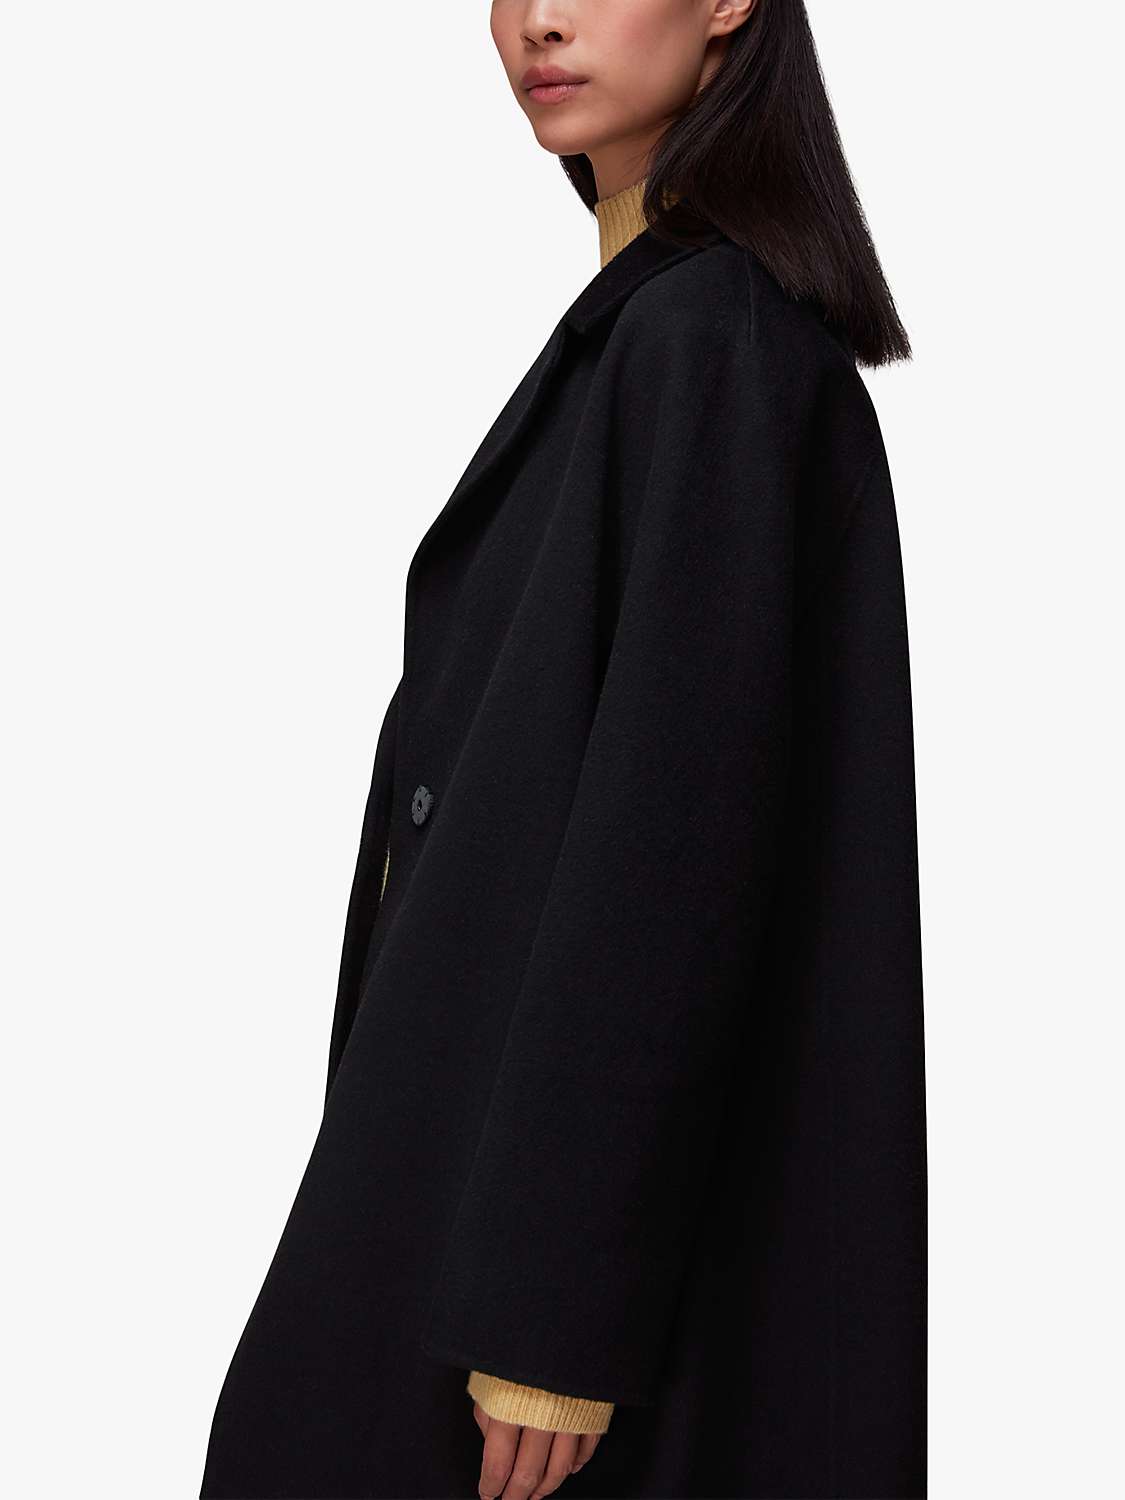 Buy Whistles Double Faced Wool Blend Coat, Black Online at johnlewis.com